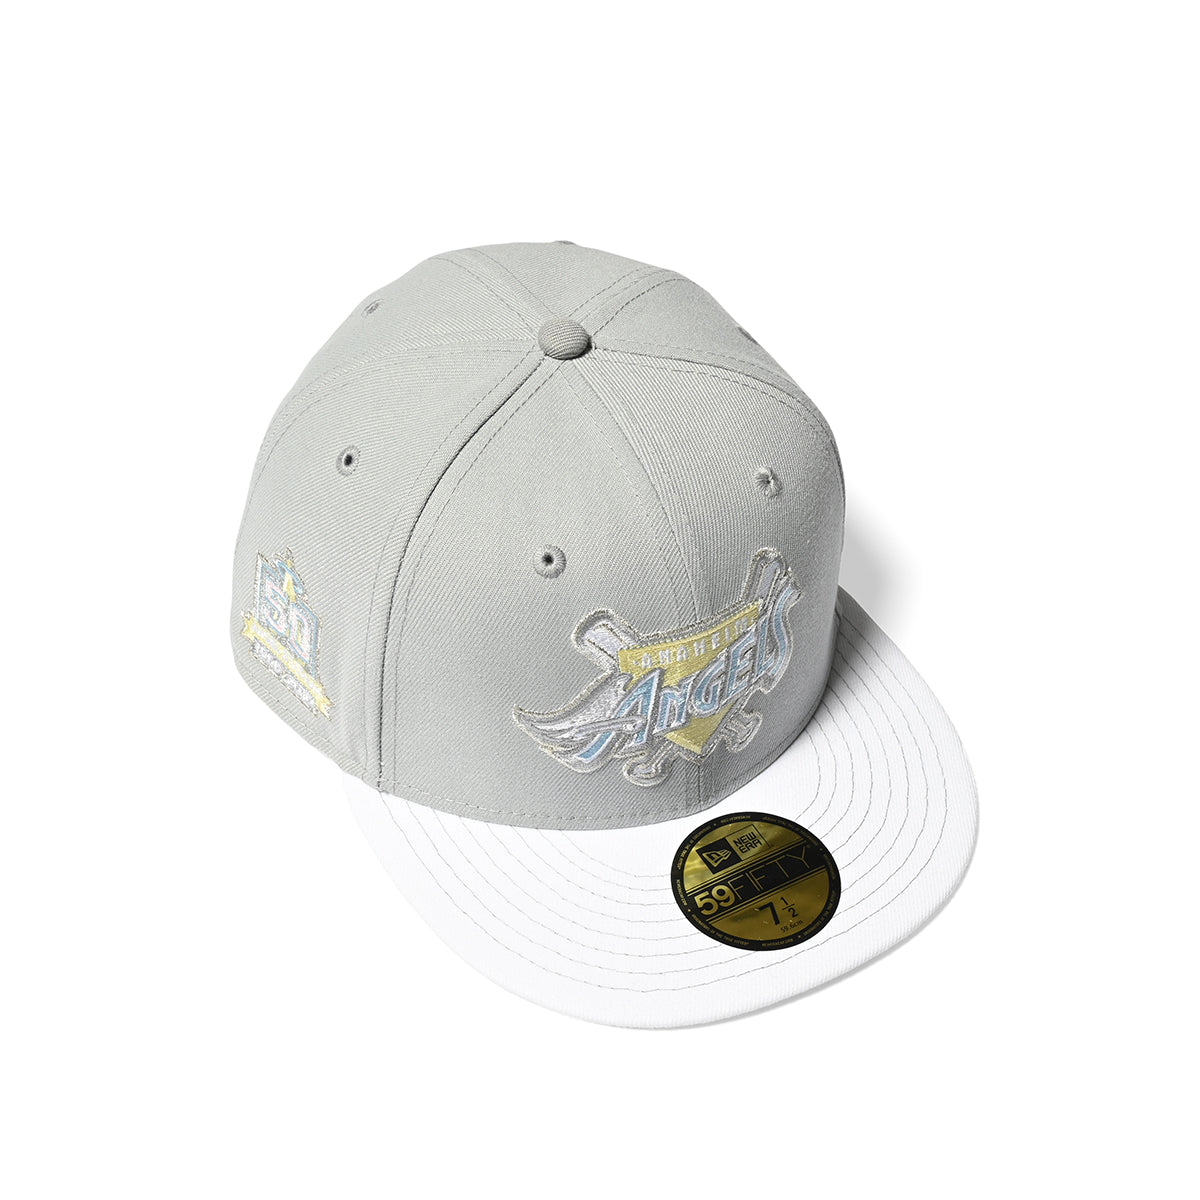 NEW ERA Anaheim Angels - 50th ANV 59FIFTY DOLPHIN GRAY/WHITE【70811961】